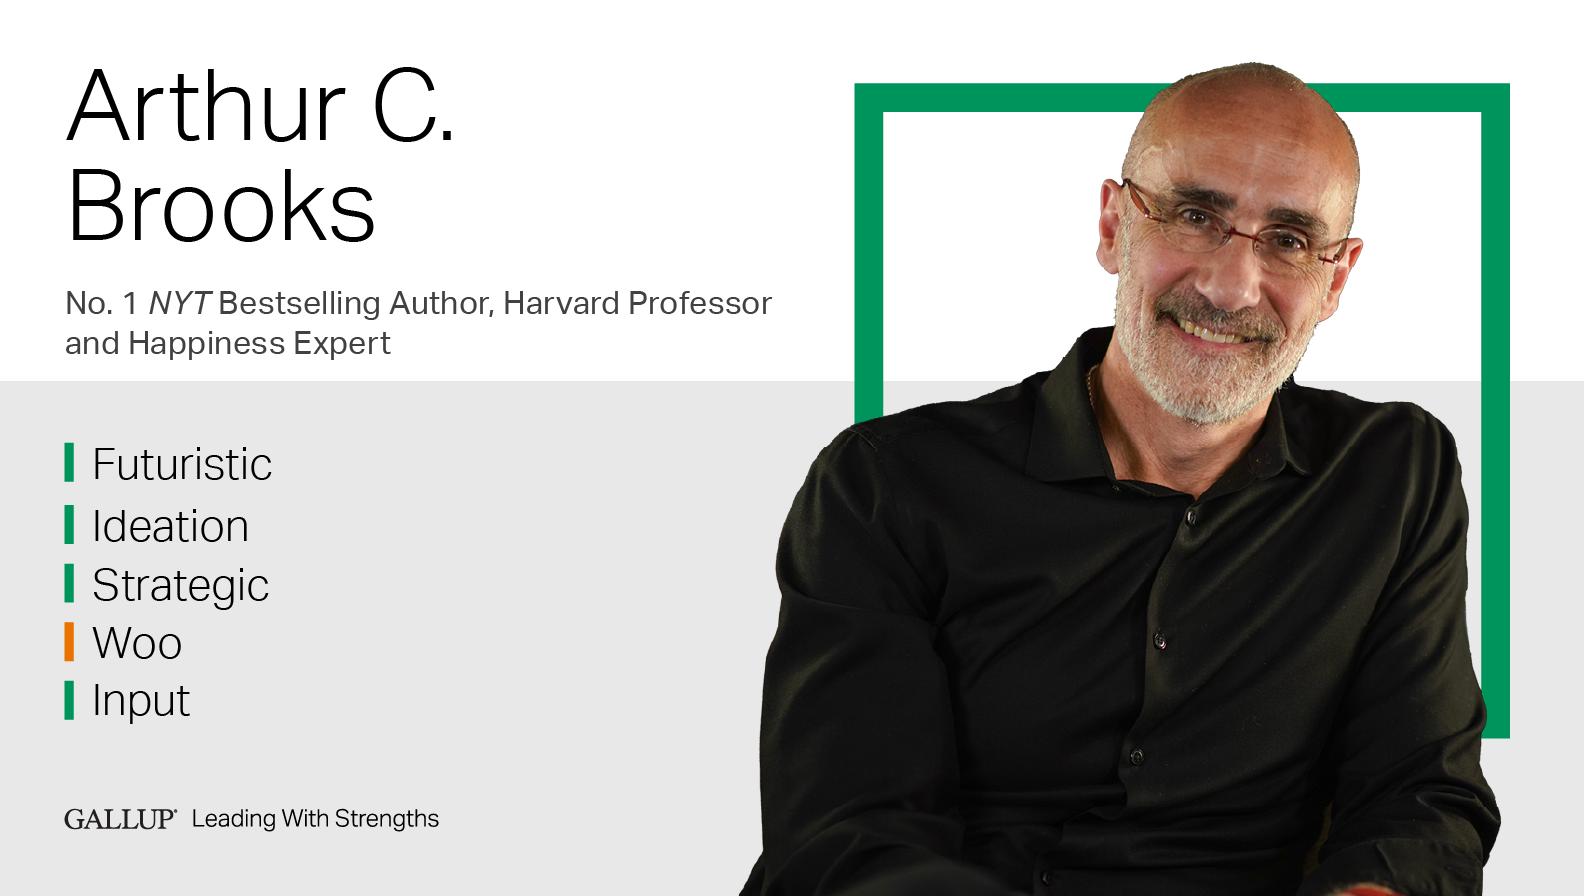 No. 1 NYT Bestselling Author, Harvard Professor and Happiness Expert. FUTURISTIC | IDEATION | STRATEGIC | WOO | INPUT. GALLUP Leading with Strengths. Play How Arthur C. Brooks Leads With Strengths Video